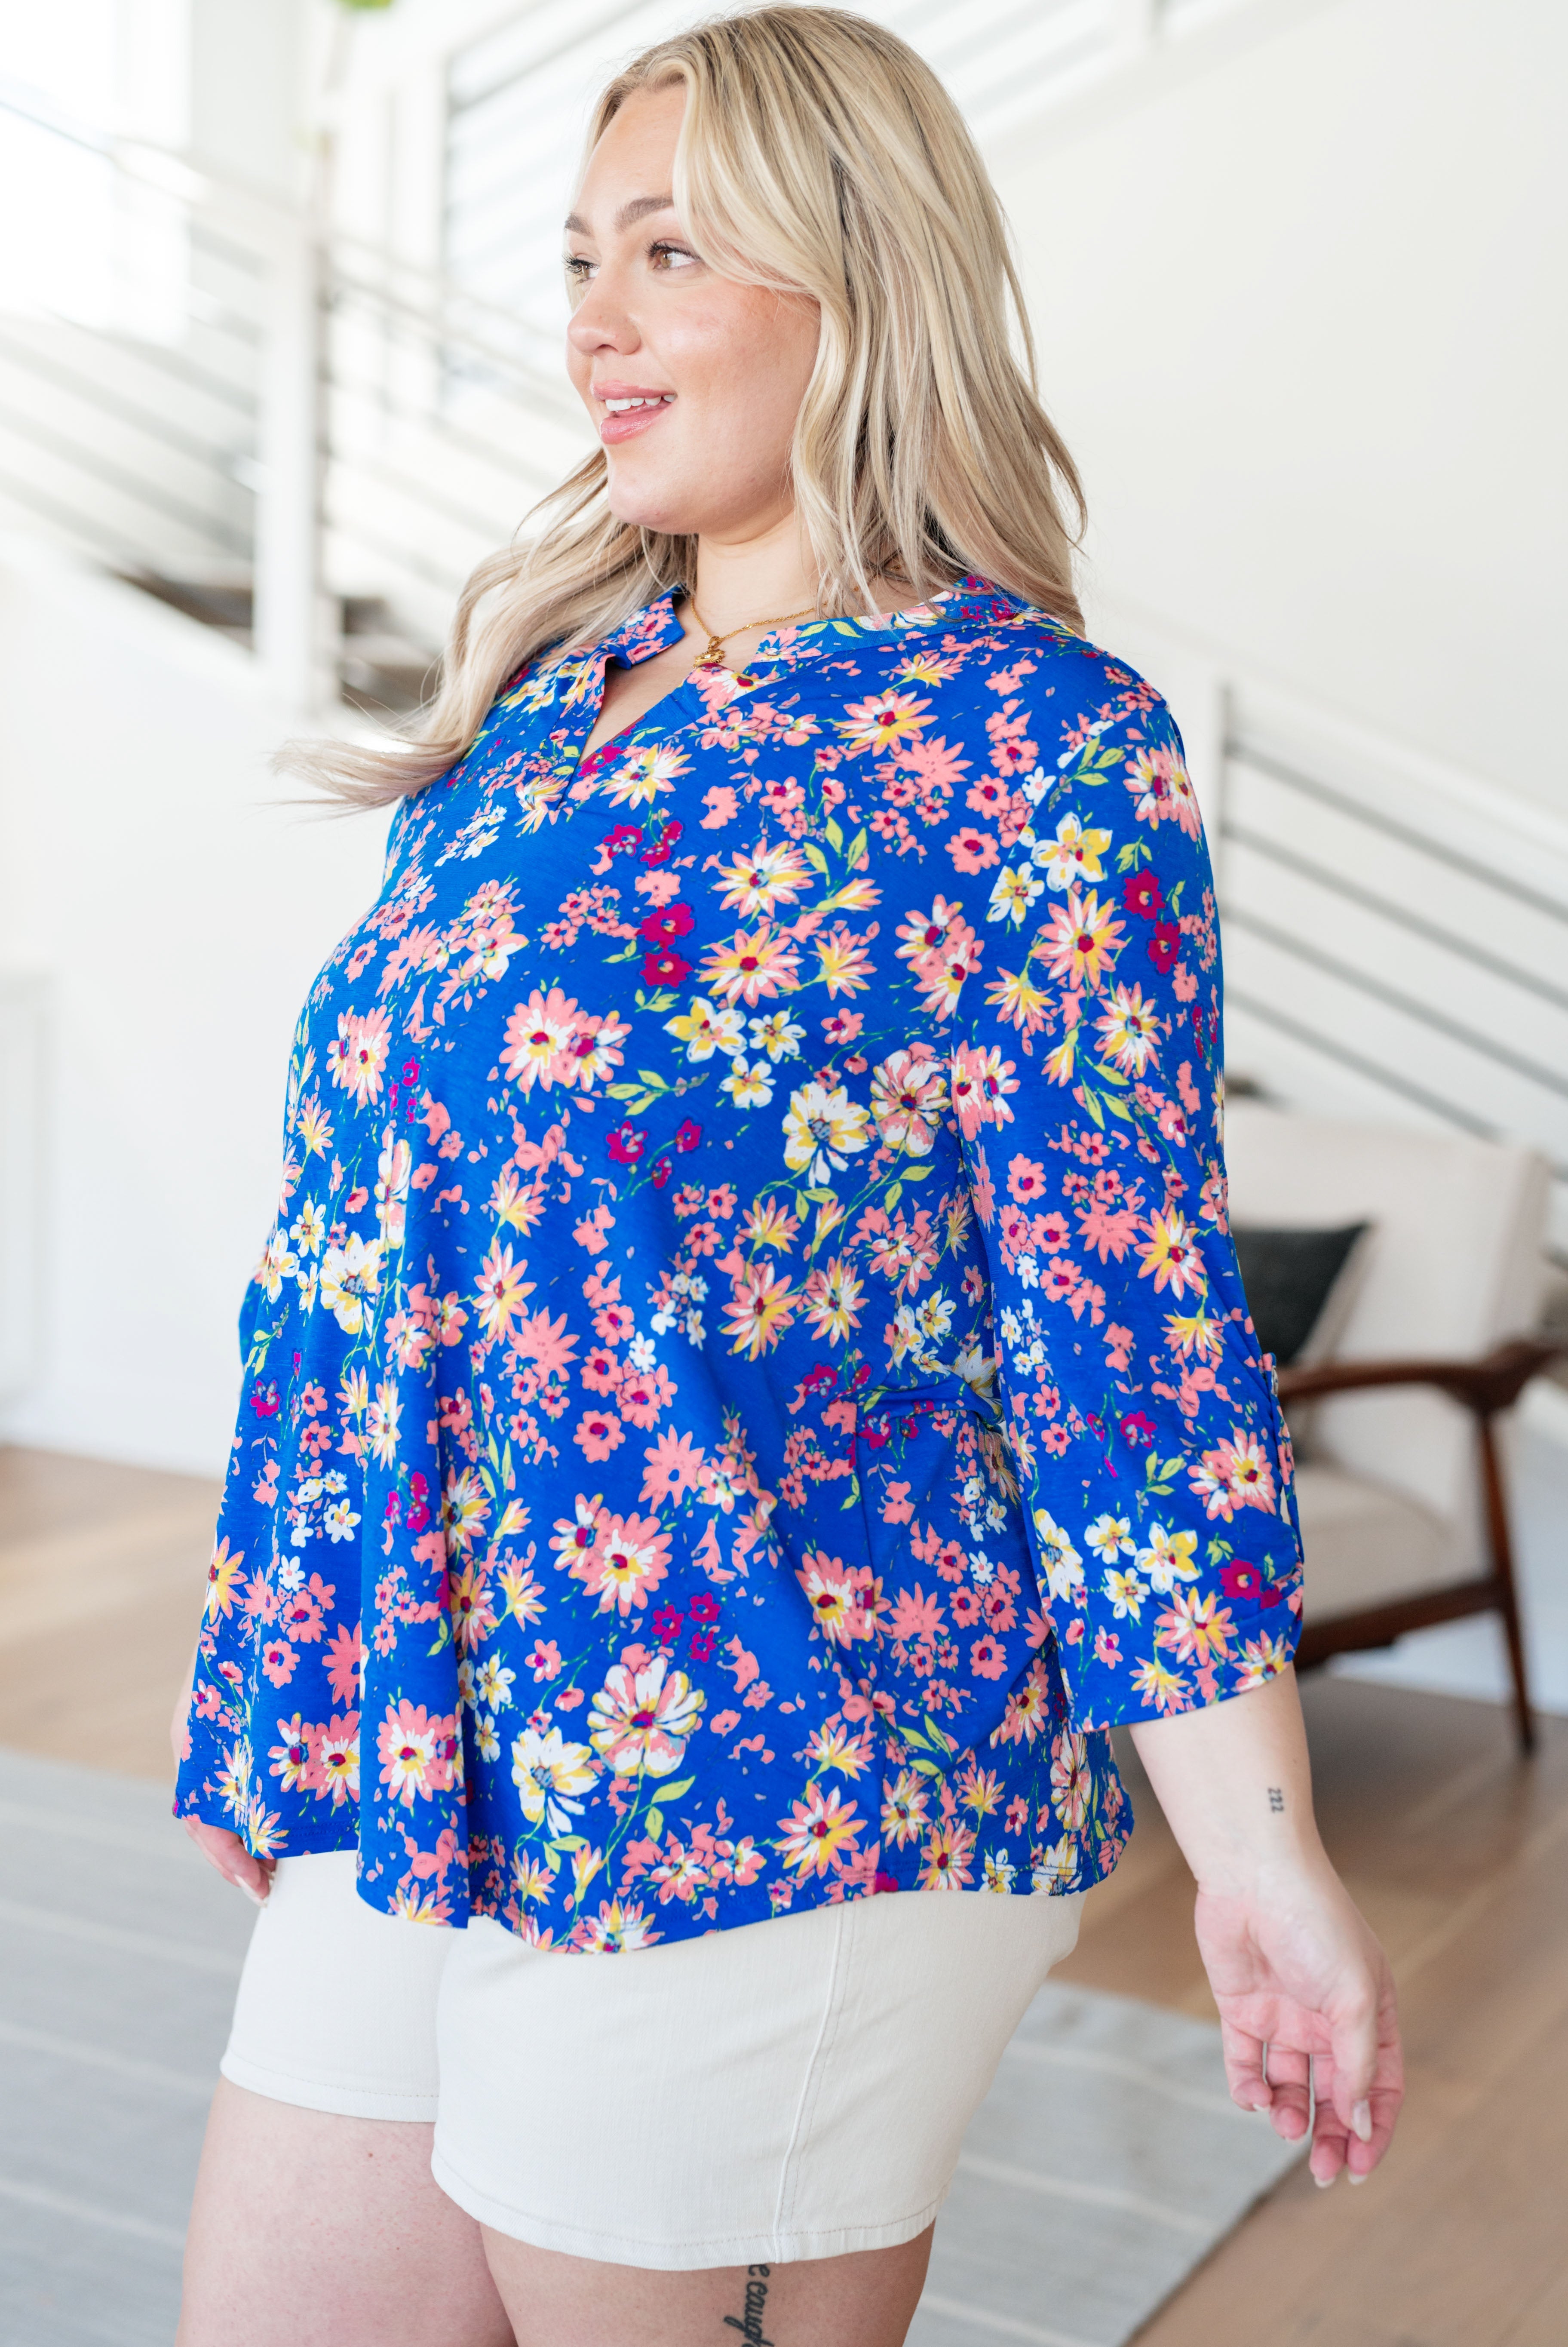 Lizzy Top in Royal and Blush Floral Tops Ave Shops   